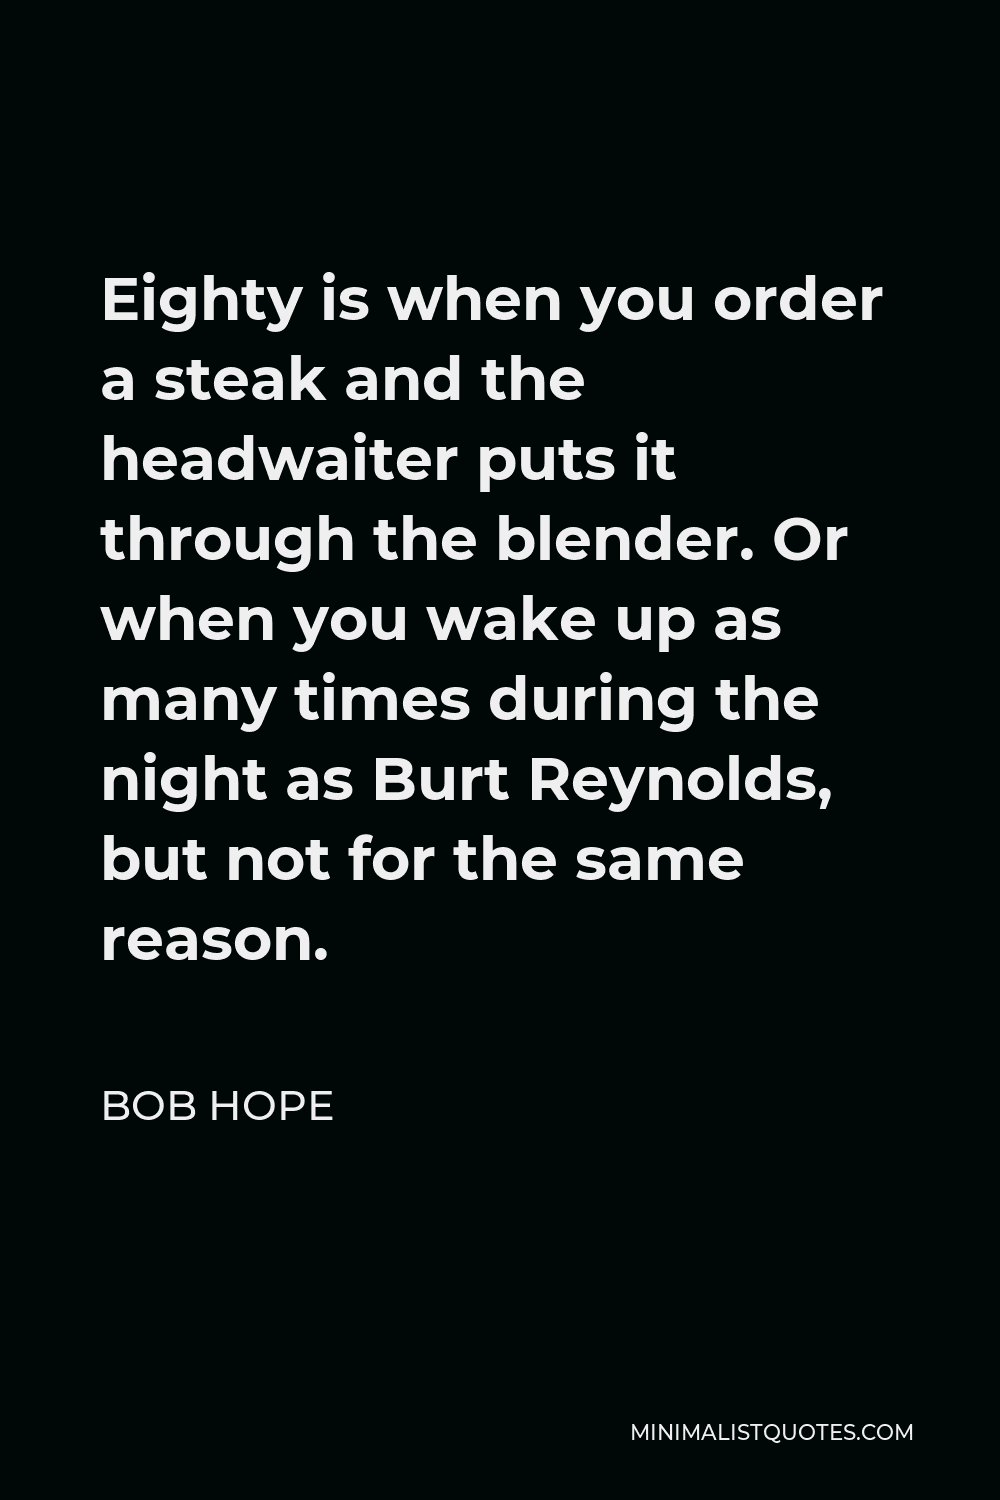 Bob Hope Quote - Eighty is when you order a steak and the headwaiter puts it through the blender. Or when you wake up as many times during the night as Burt Reynolds, but not for the same reason.